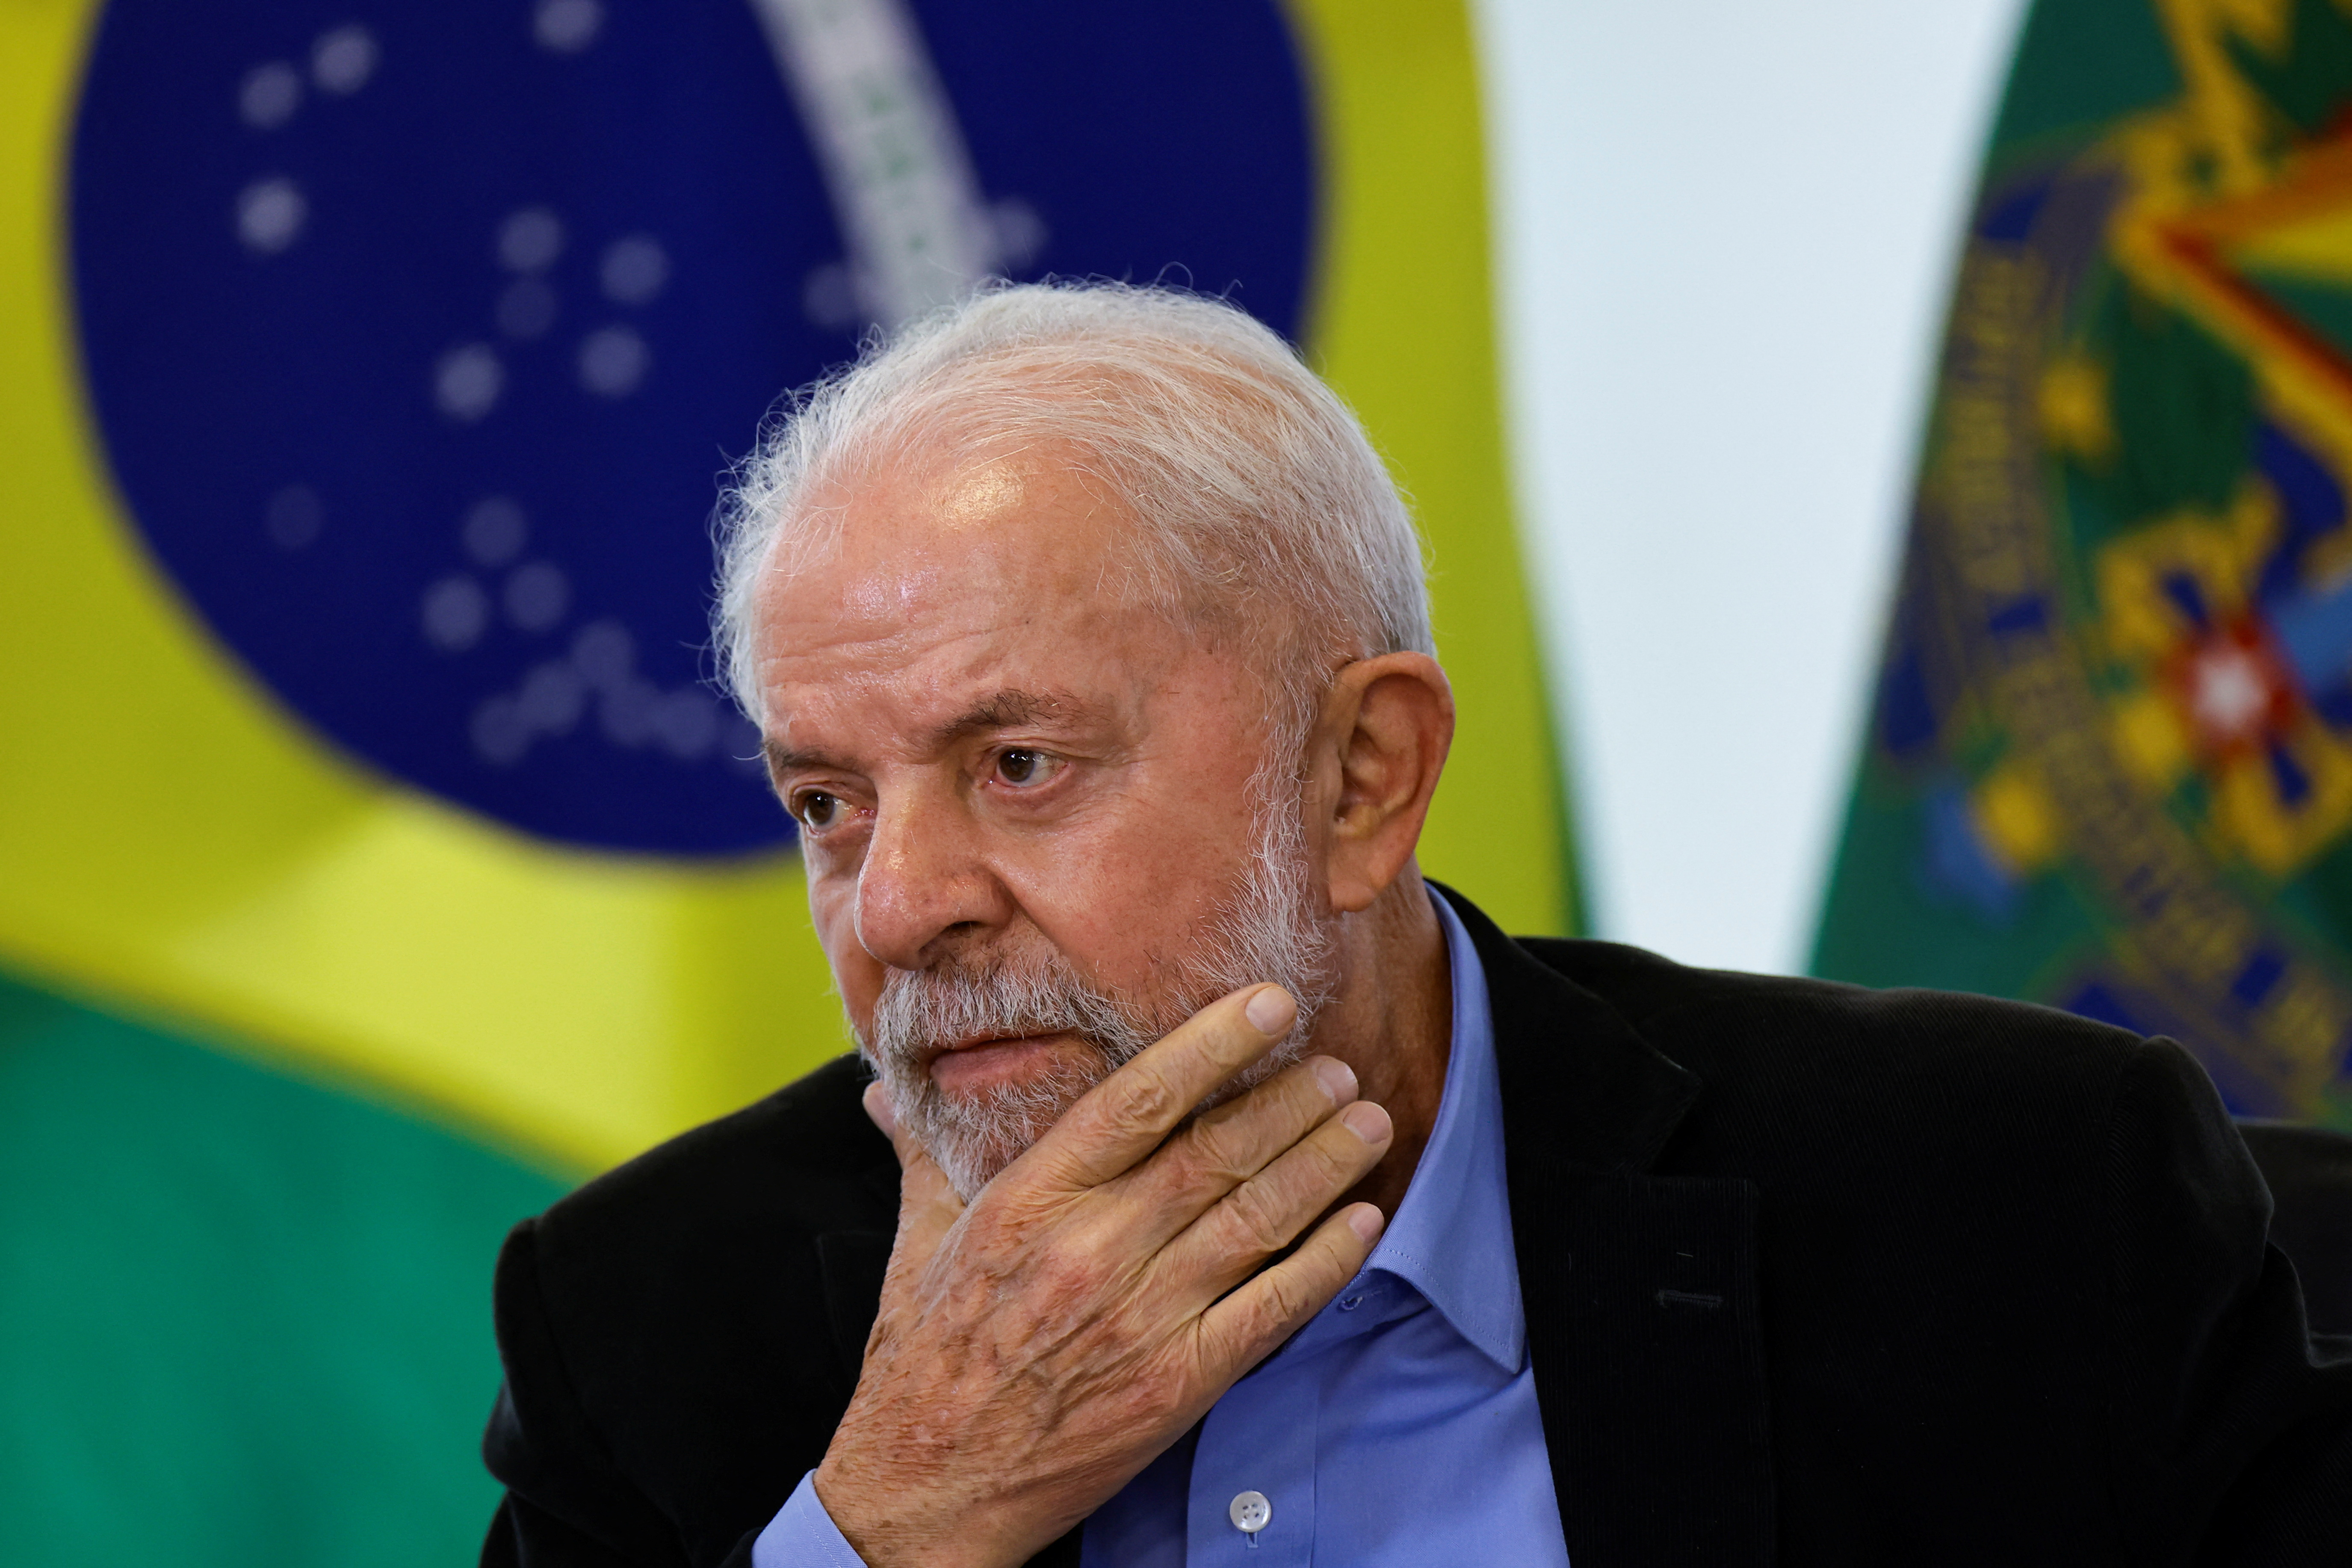 Brazil’s President Luiz Inacio Lula da Silva reacts during a meeting with members of the automotive sector in Brasilia